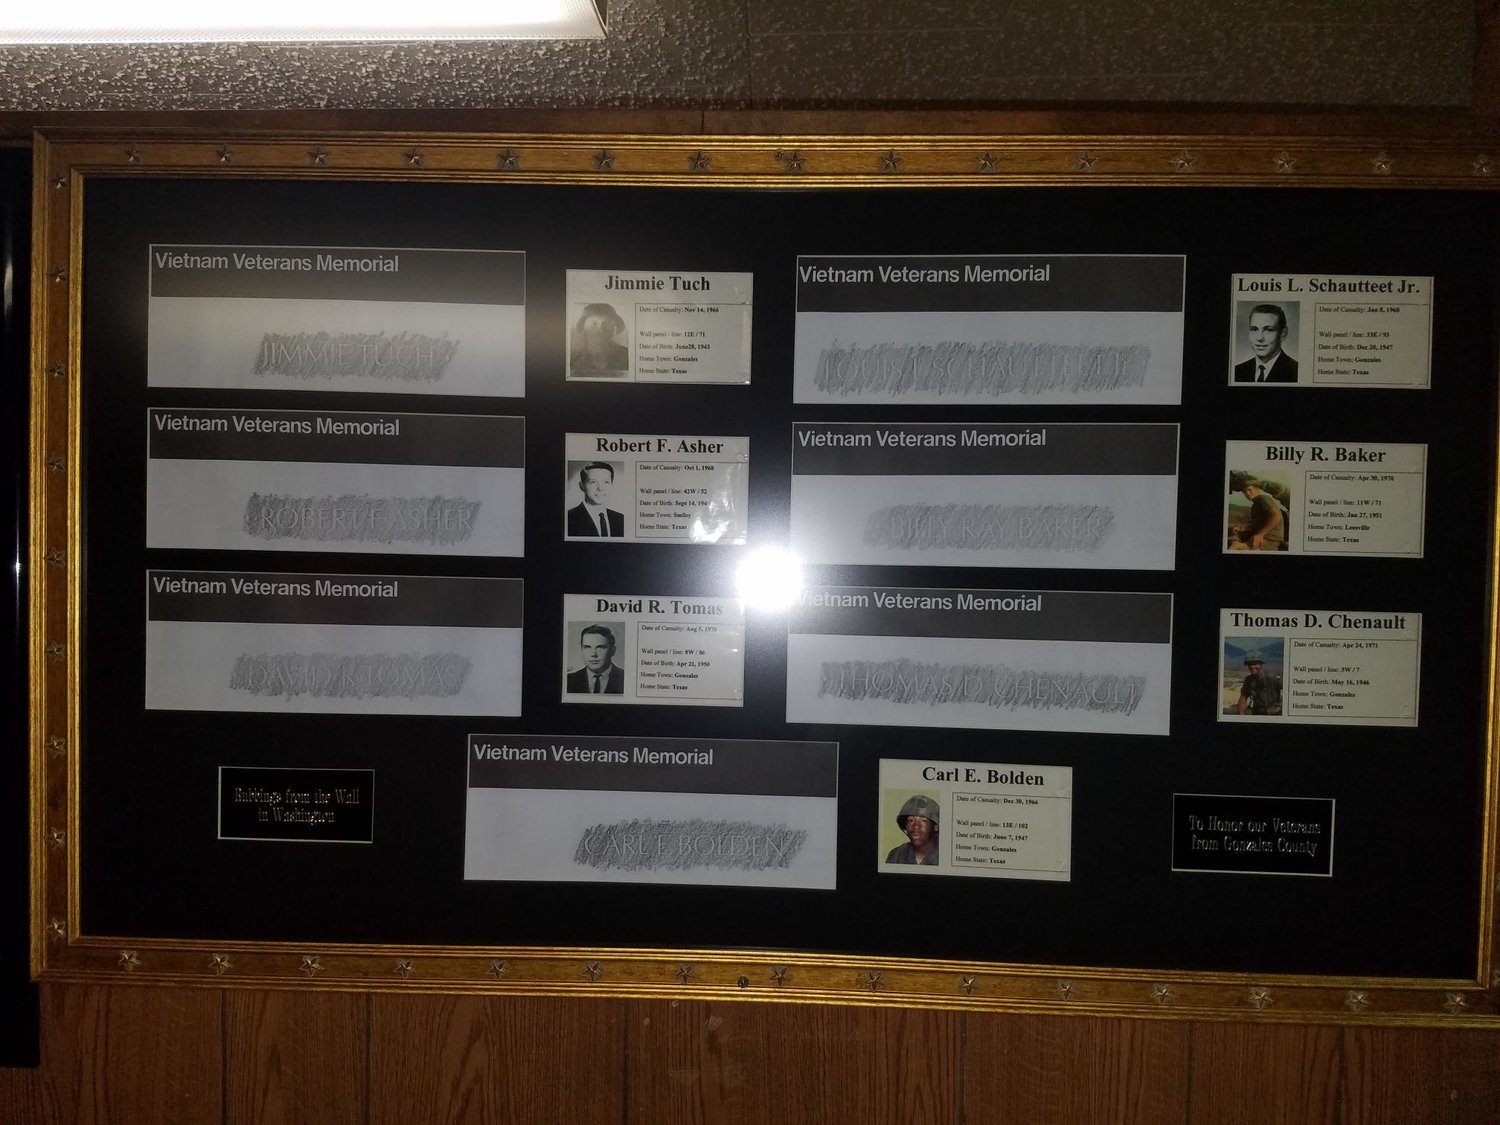 Be sure to check out this tribute displayed at the VFW Post of seven local man who made the ultimate sacrifice for their country during the Vietnam War.